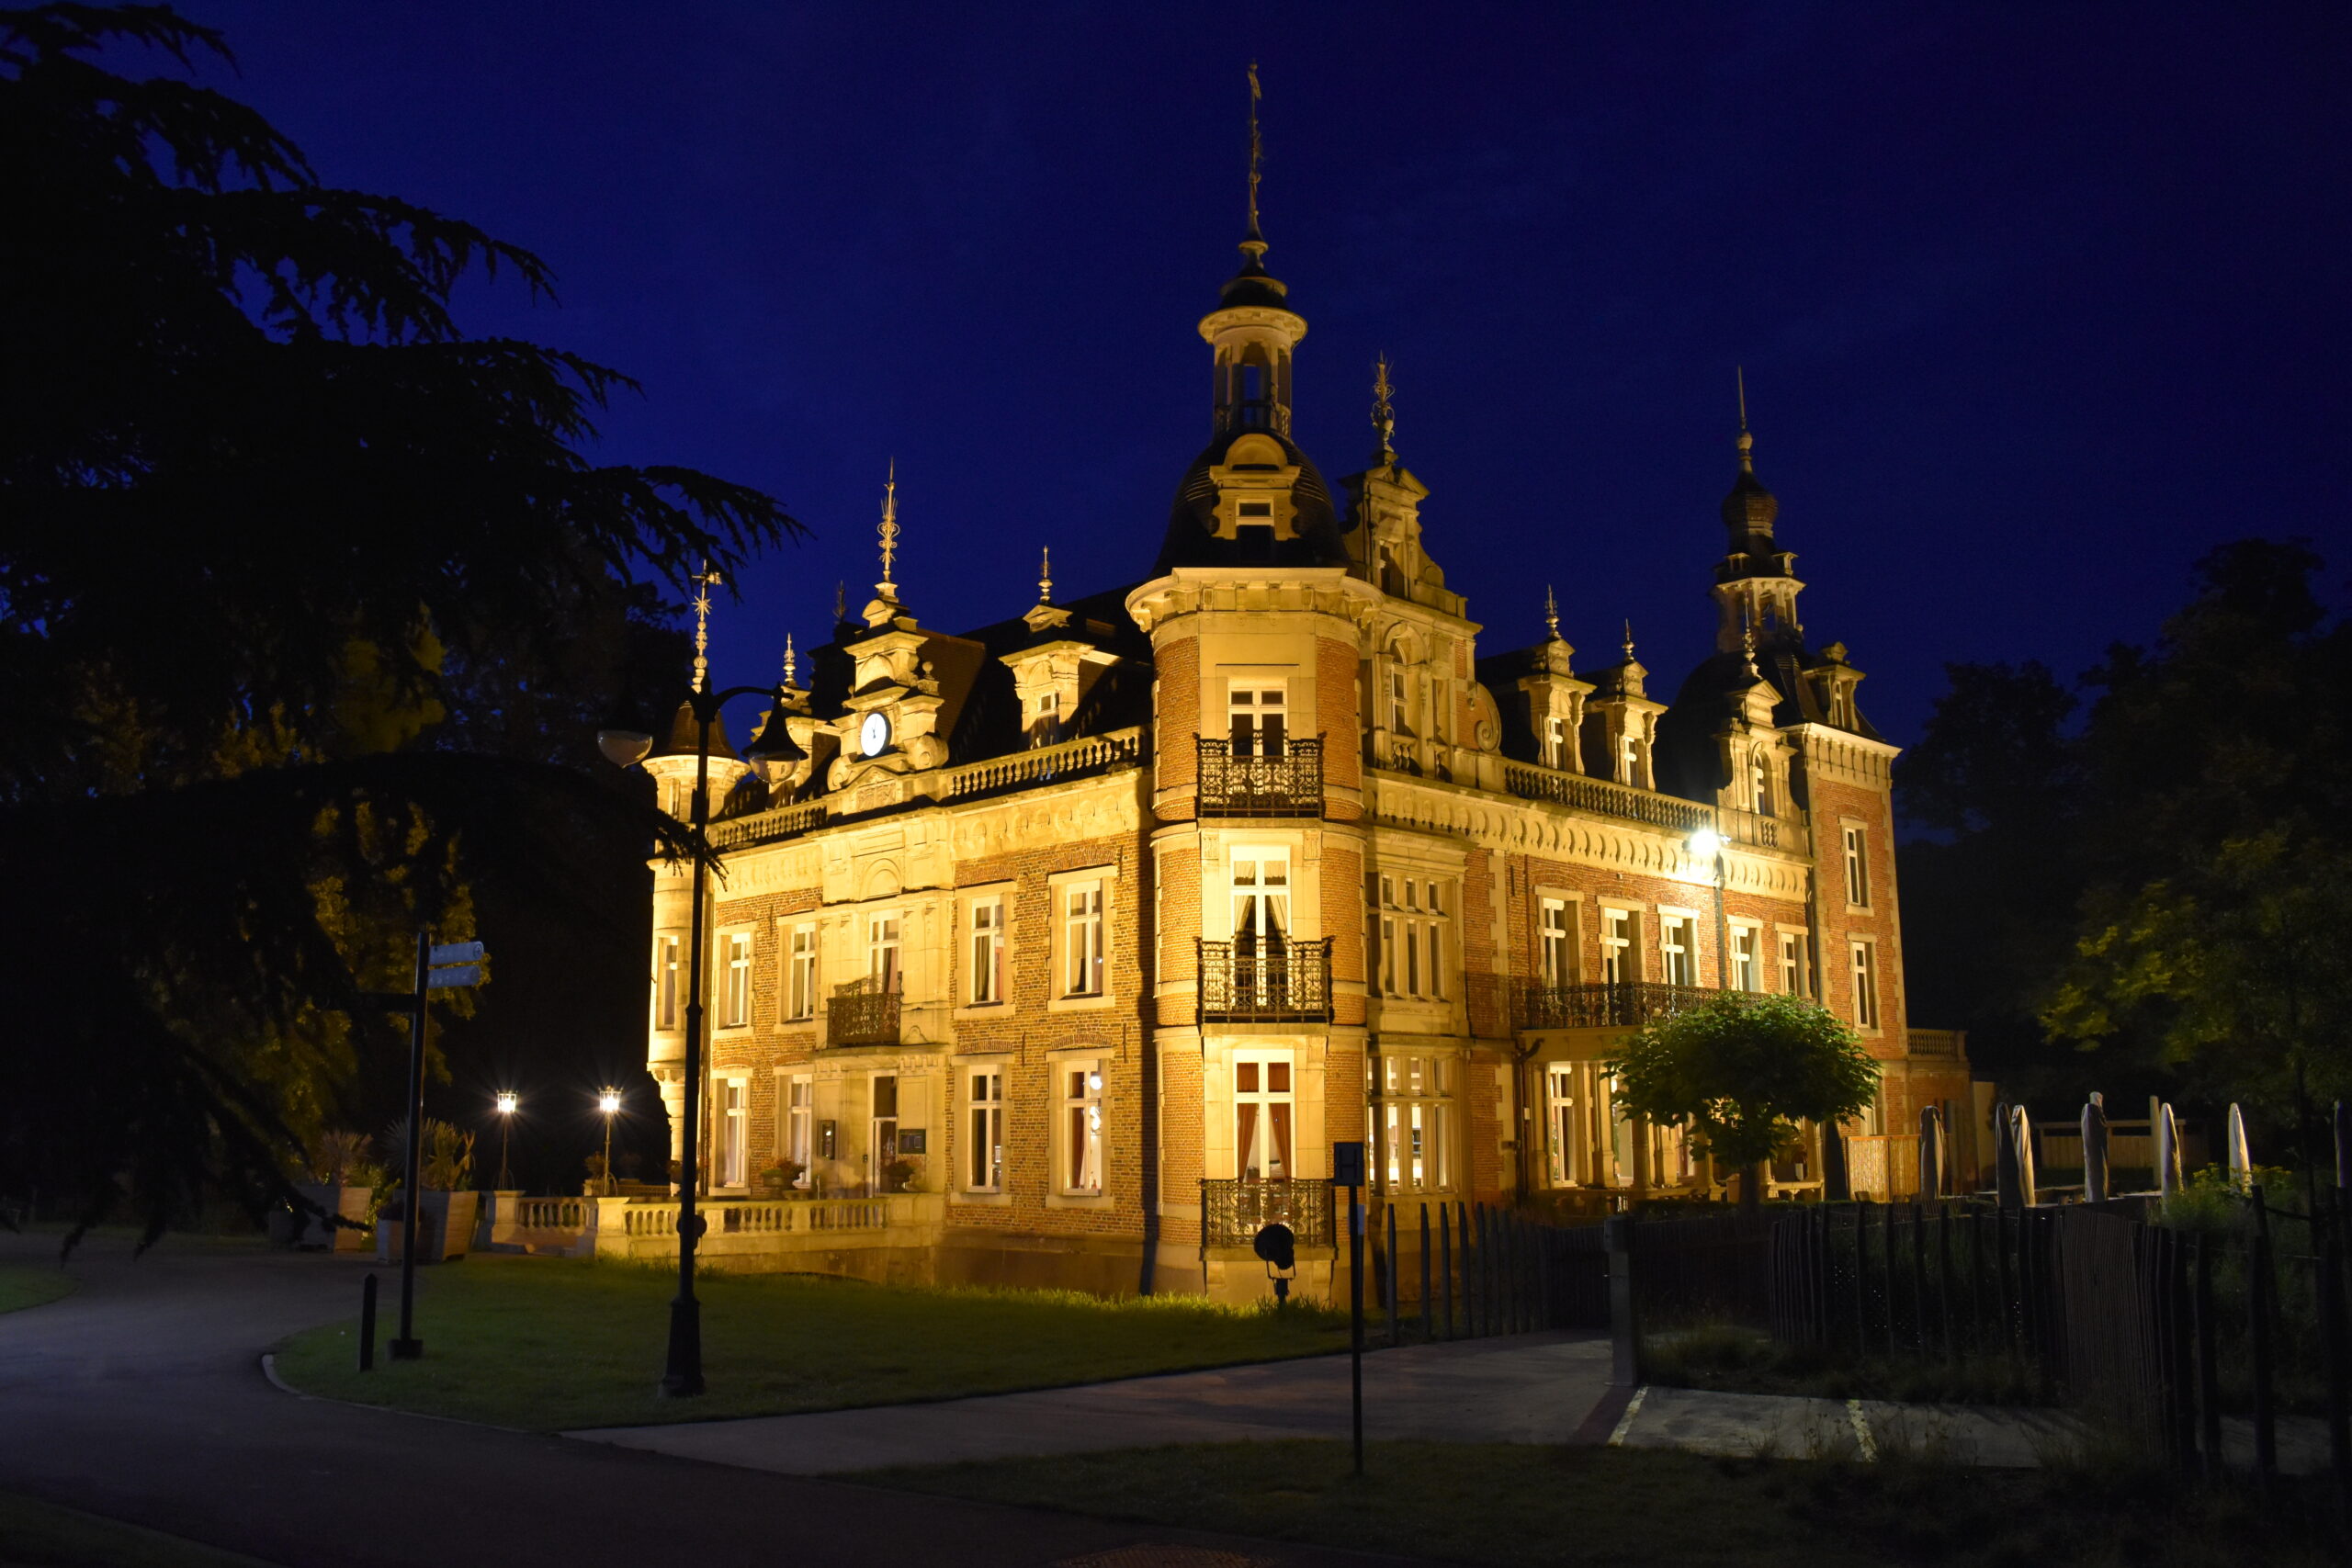 Side view of the castle during the night